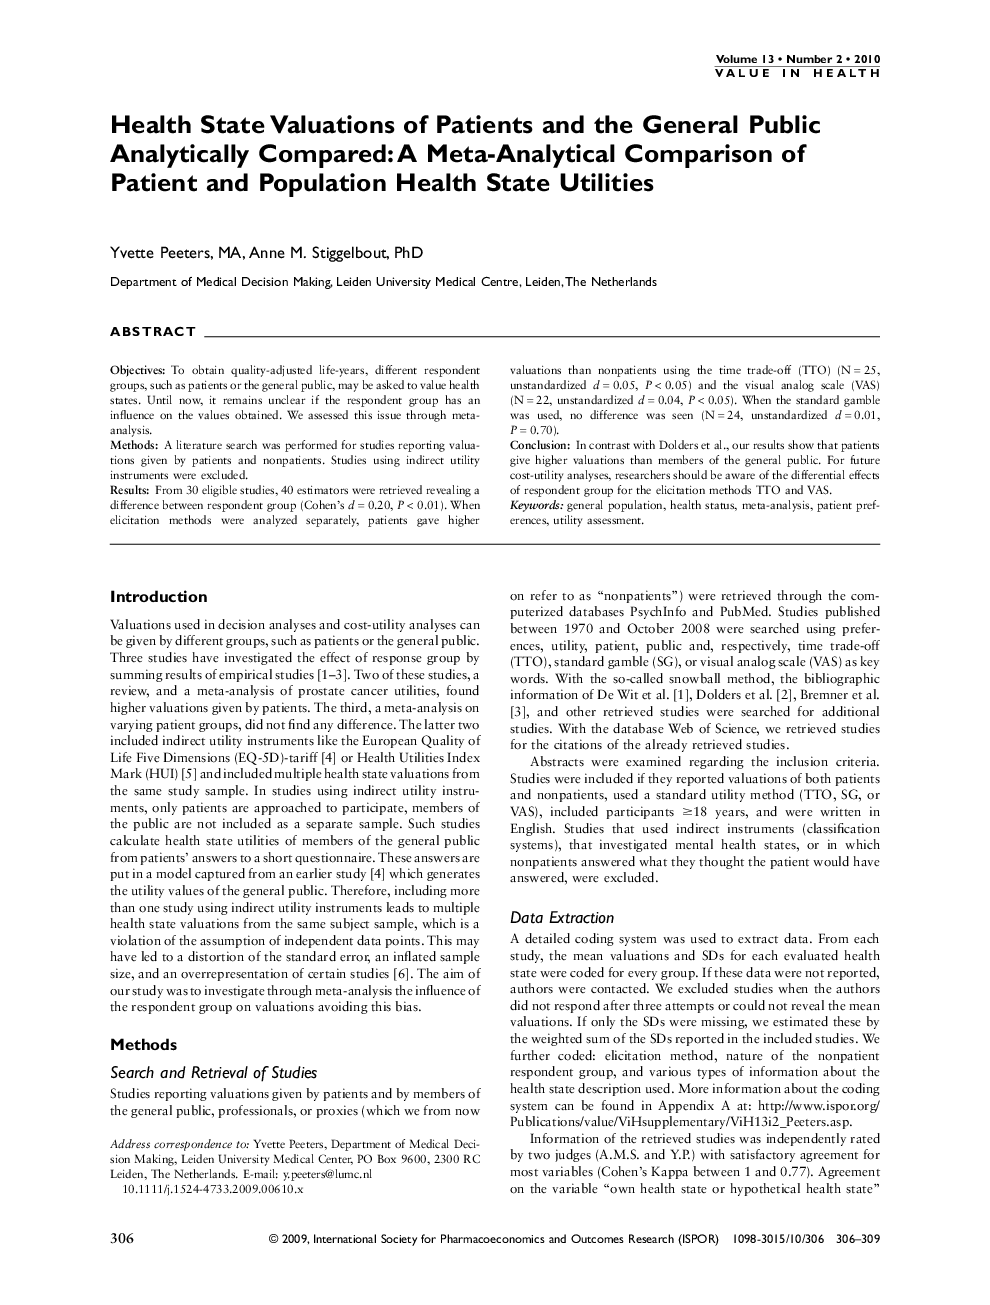 Health State Valuations of Patients and the General Public Analytically Compared: A Meta-Analytical Comparison of Patient and Population Health State Utilities